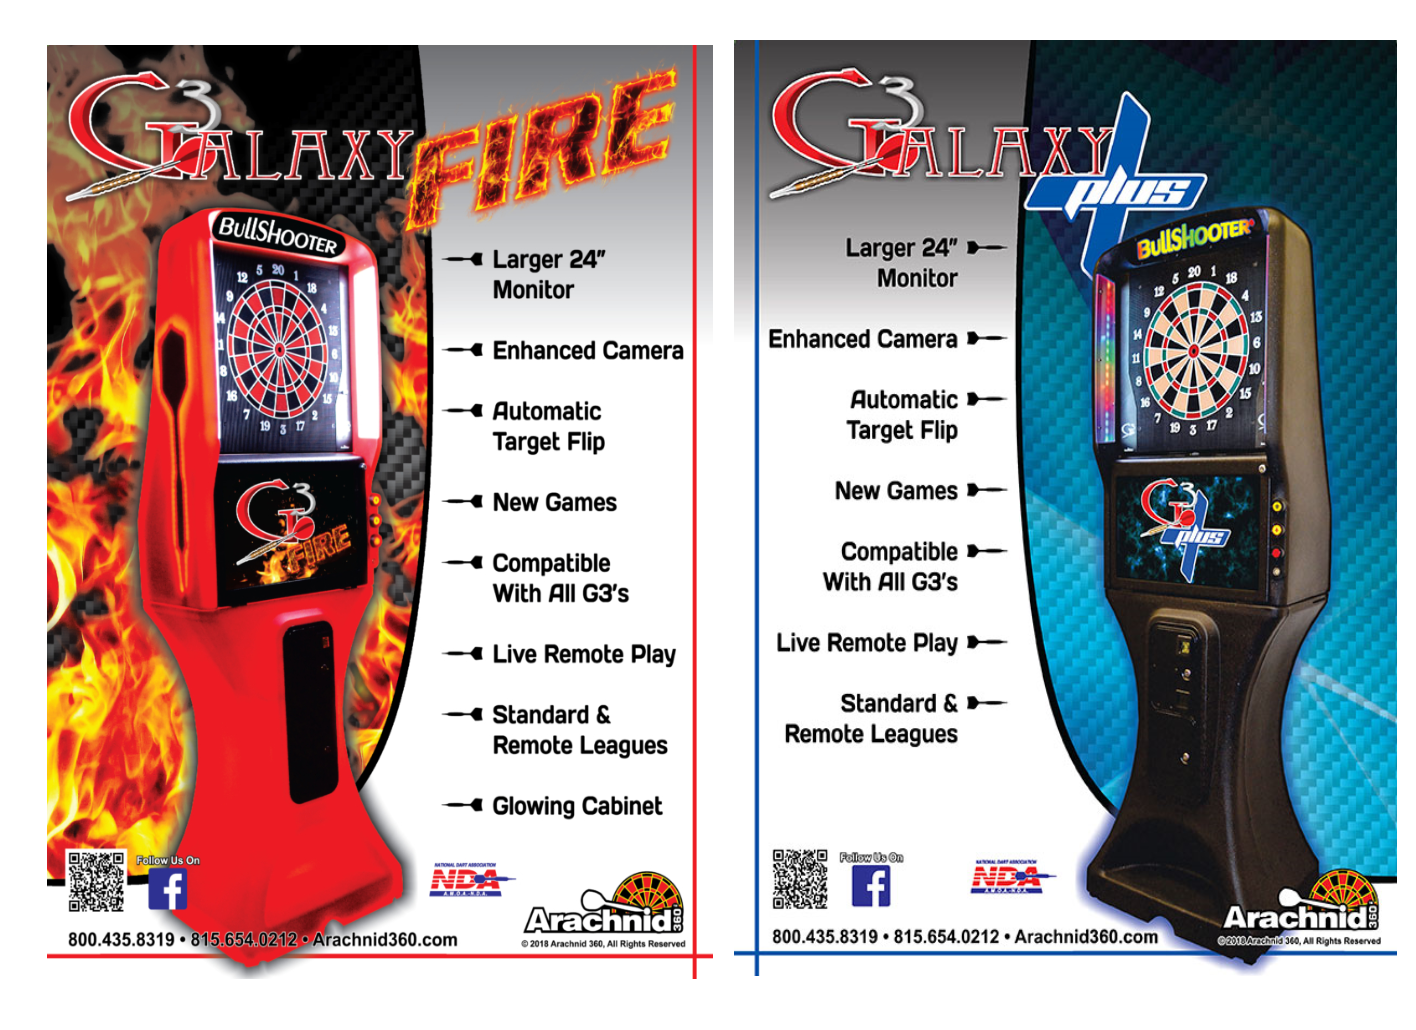 Galaxay Fire 3 Fire and Plus games